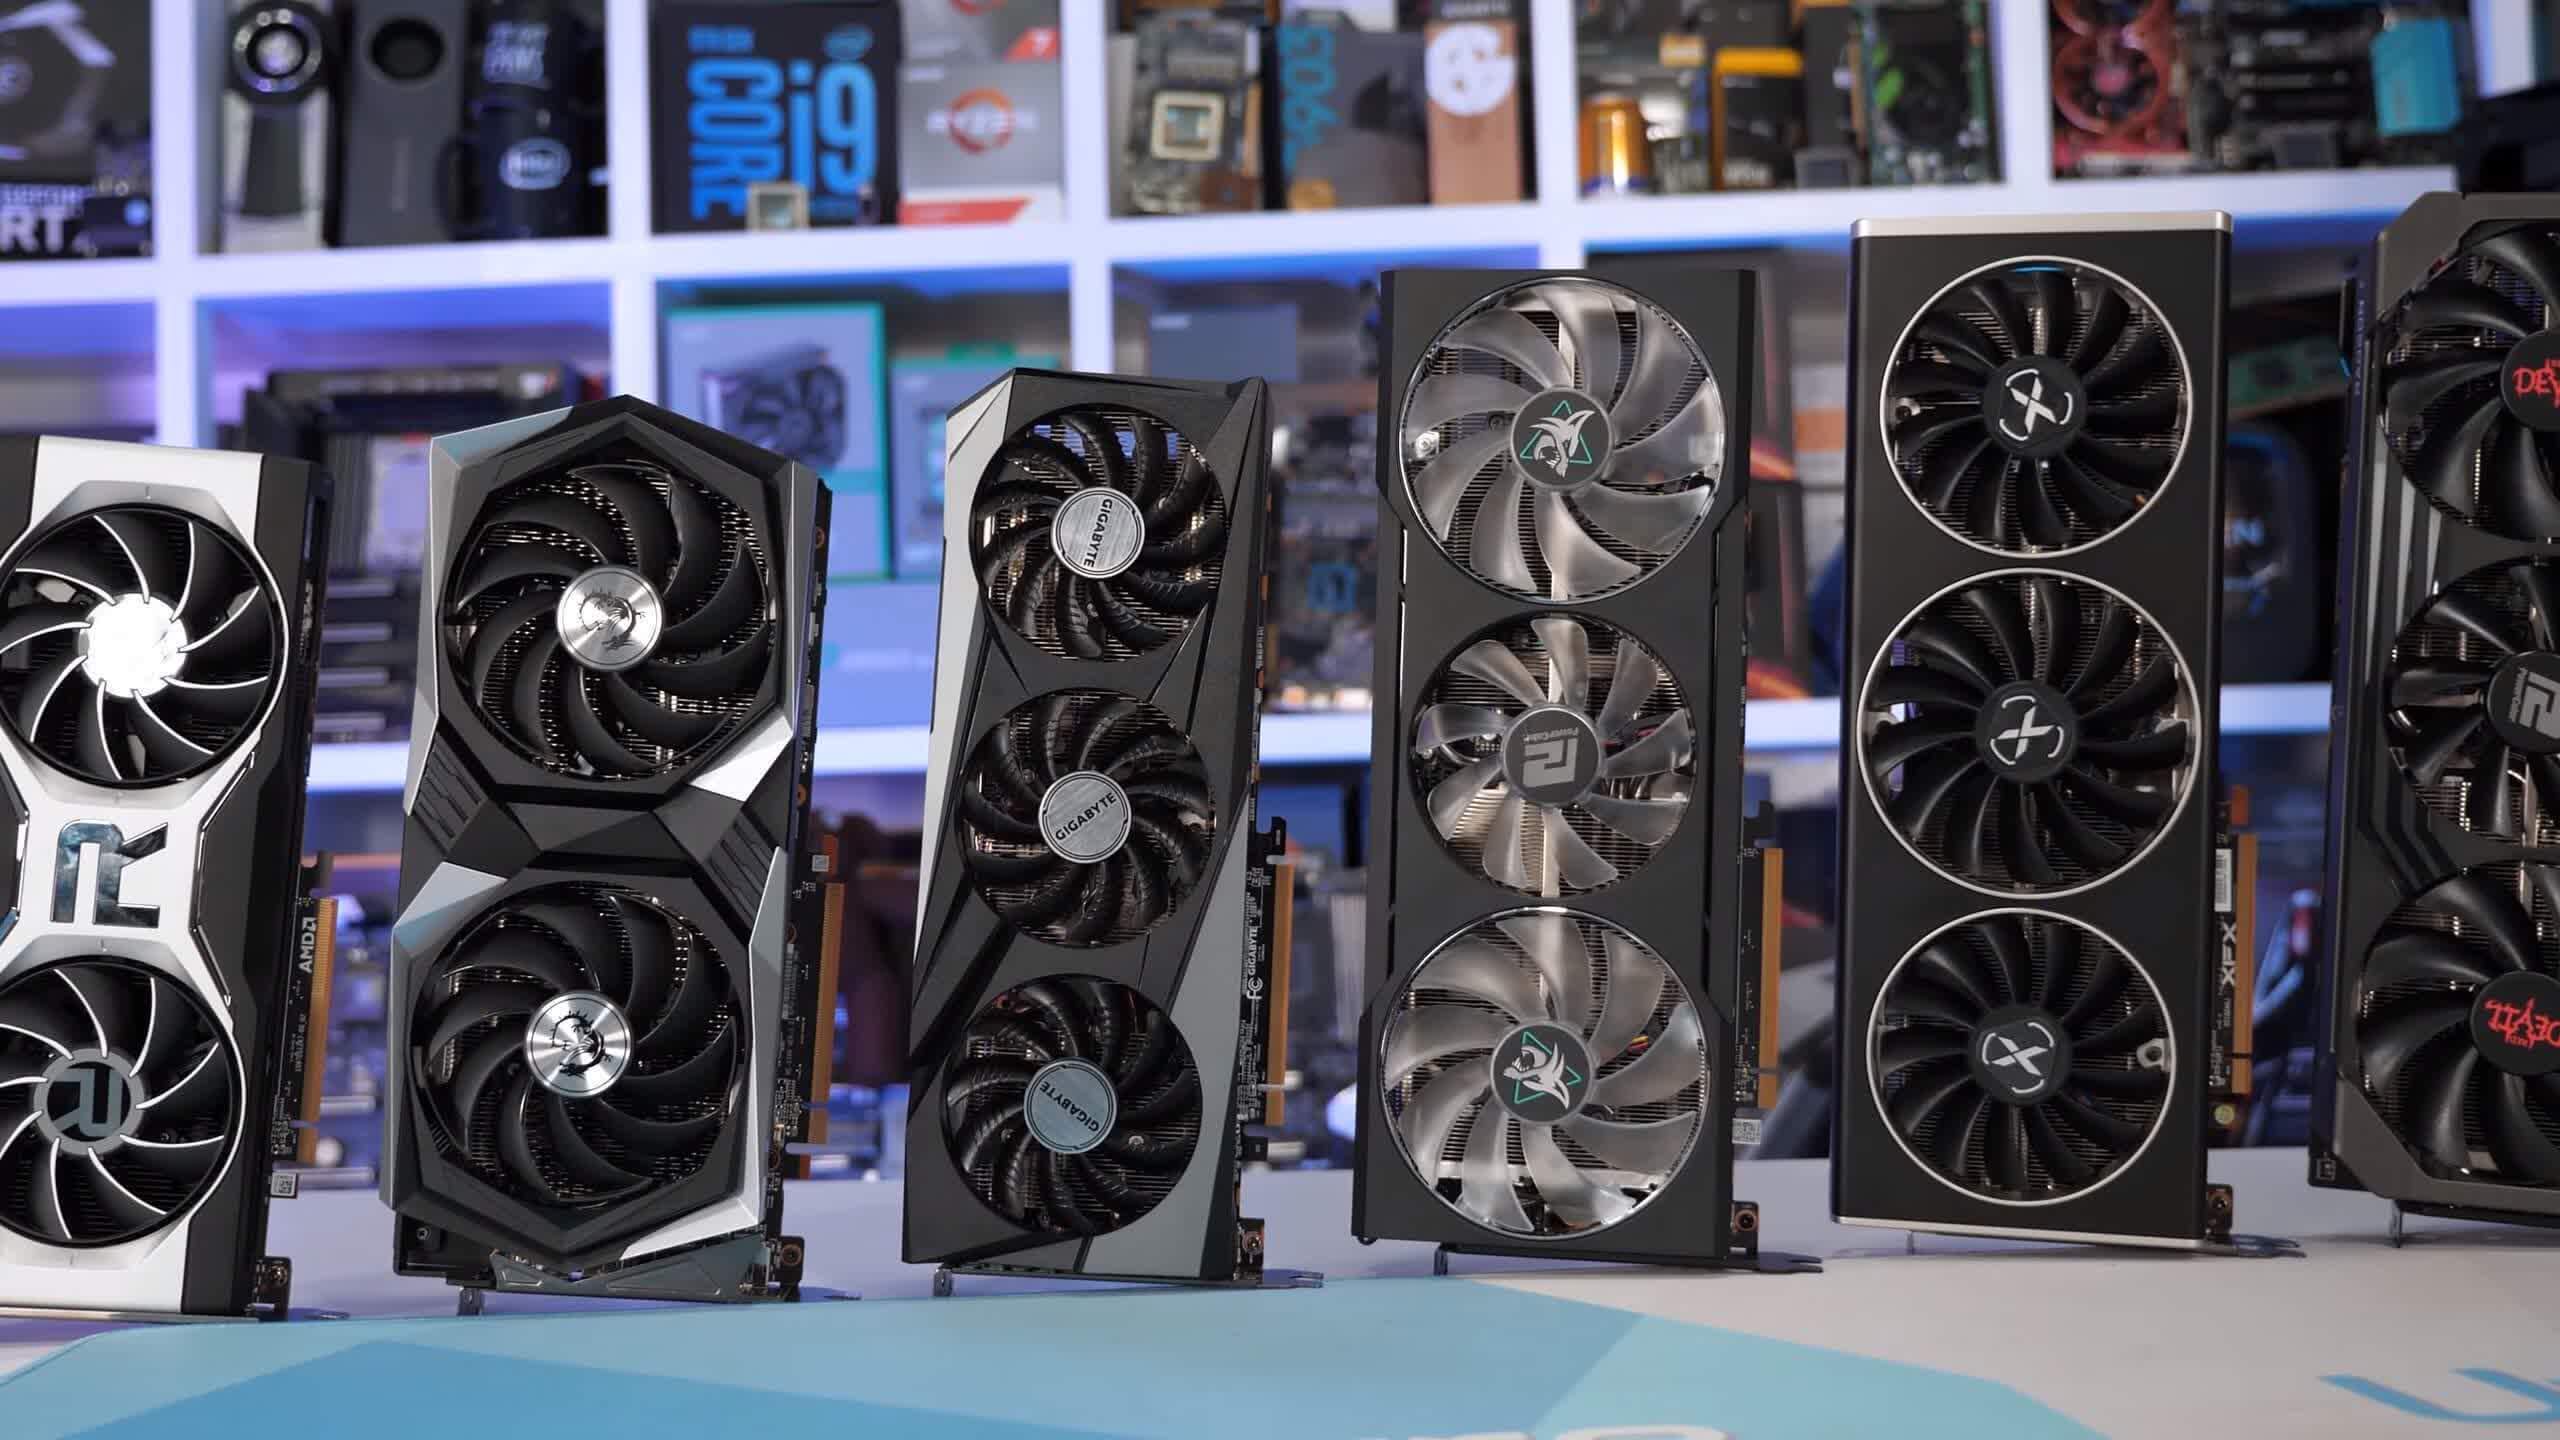 Graphics card prices drop again, now within seven percent of MSRP